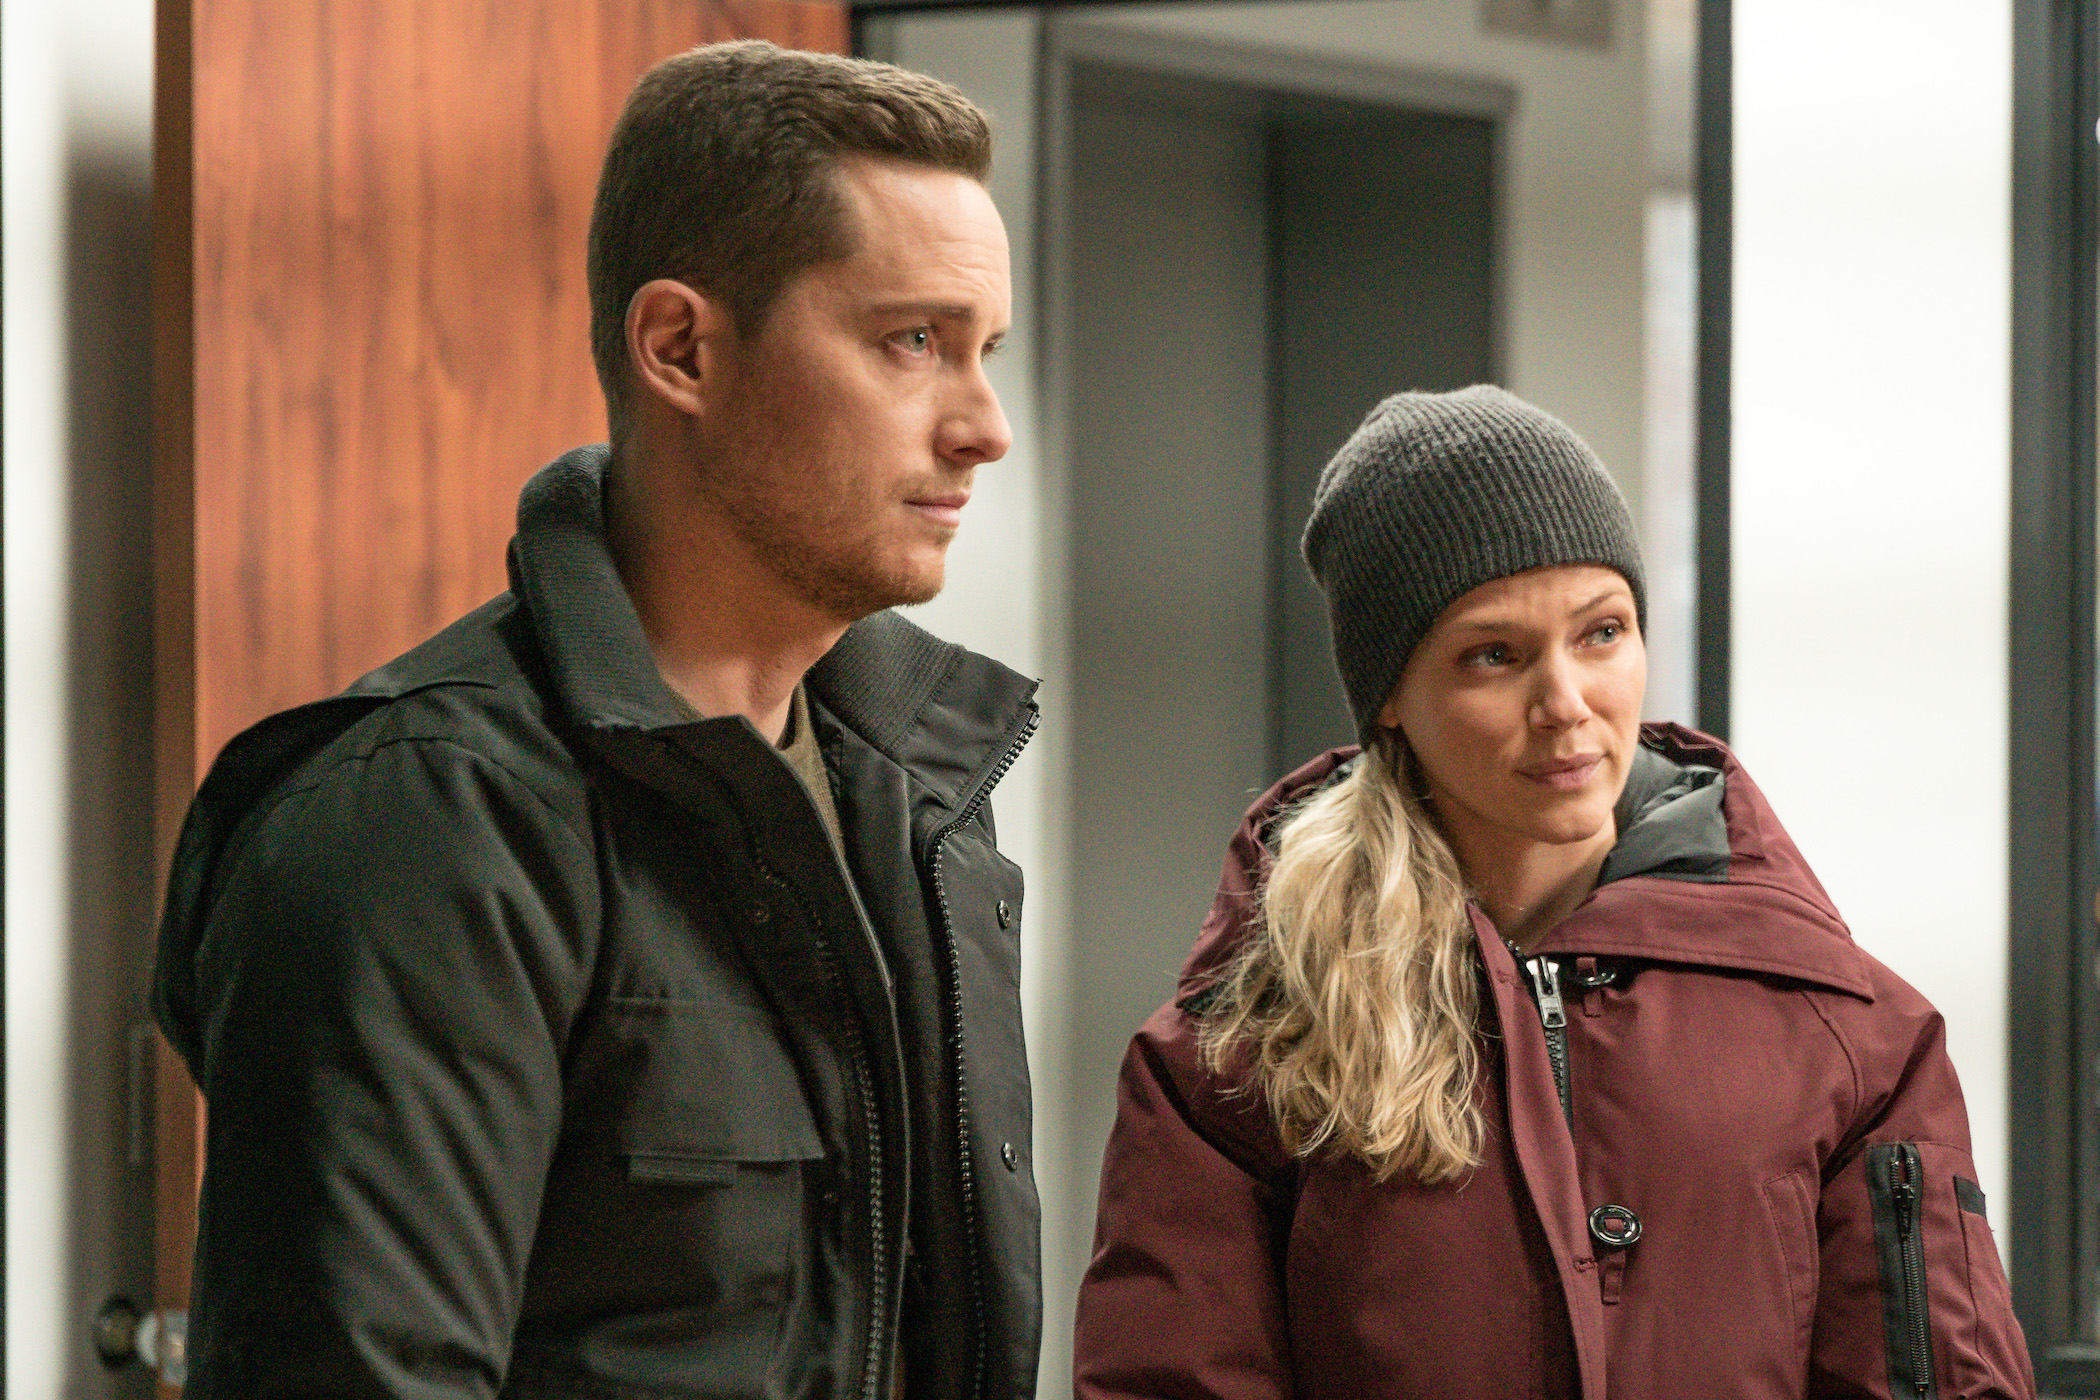 'Chicago P.D.' Season 9 stars Jesse Lee Soffer as Jay Halstead and Tracy Spiridakos as Hailey Upton standing next to each other. 'Chicago P.D.' Season 9 spoilers state they get engaged.